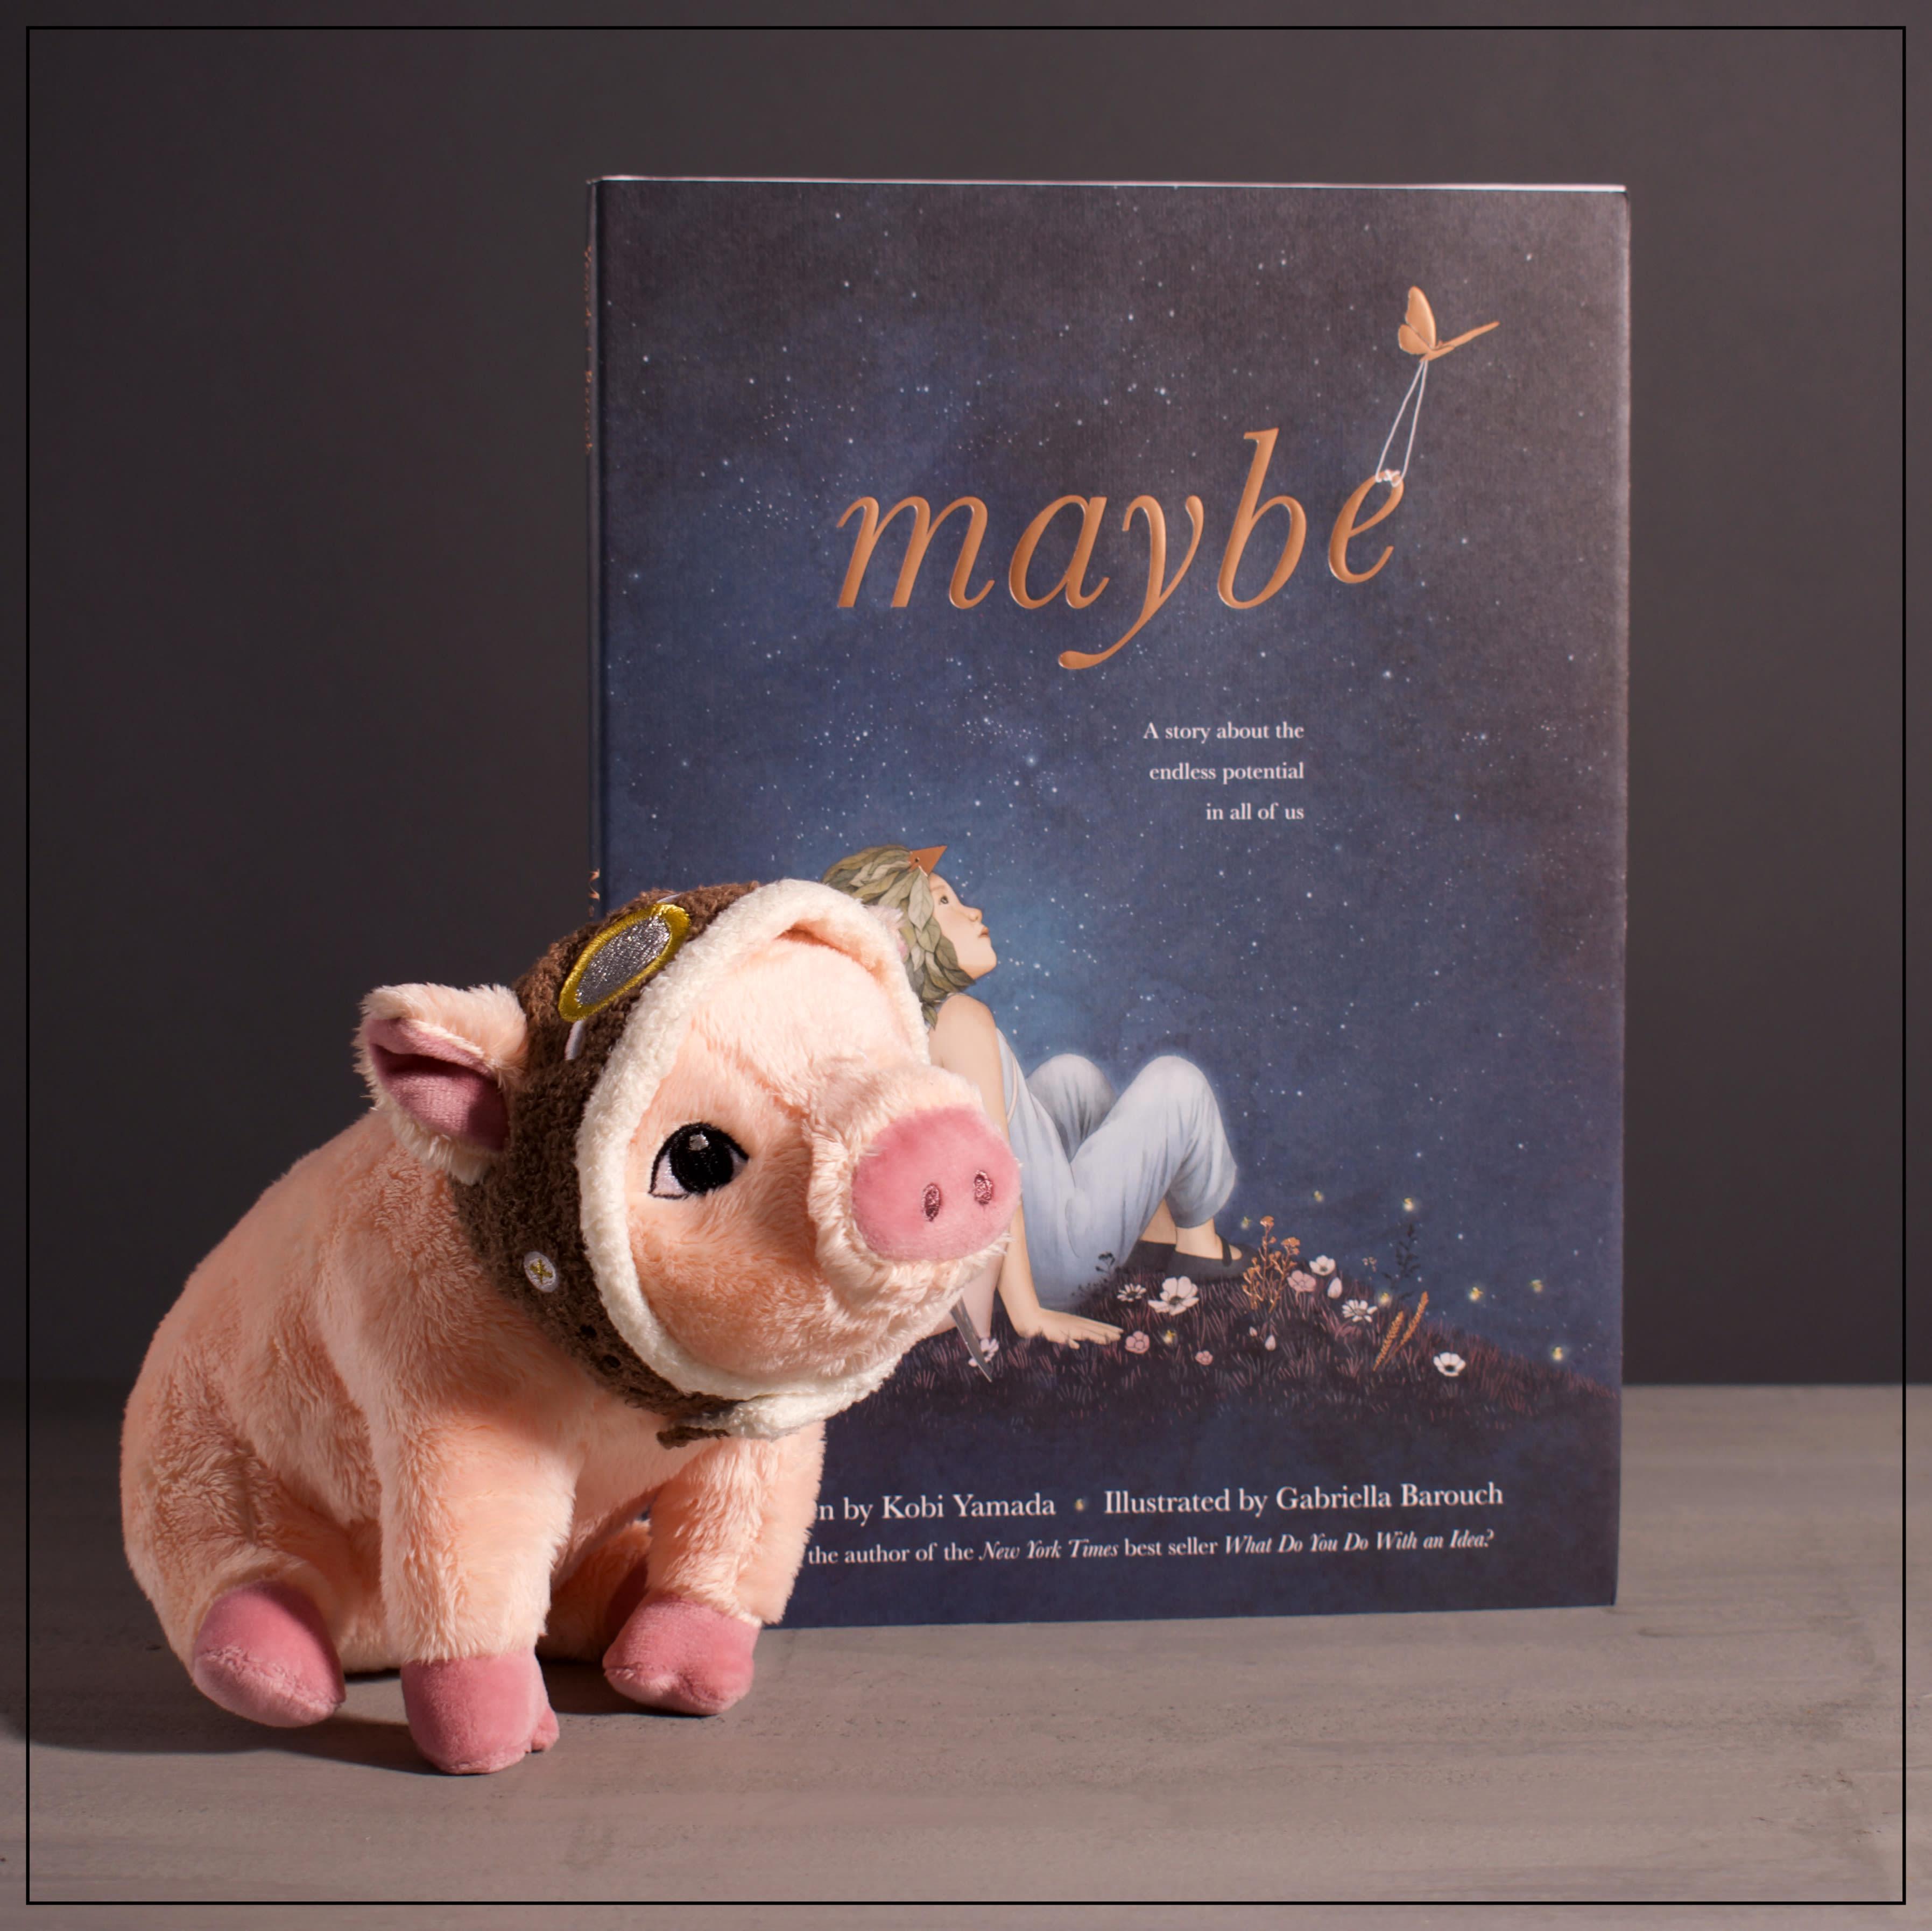 Maybe Book w/ Matching Plush - 1 Book w/ Matching Plush. It’s a story about all the possibilities ahead of you. It’s for who you are right now and it’s for all the magical, unbounded potential you hold inside. With its beautiful visual storytelling and timeless message, Maybe is an inspiring story for kids of all ages. 